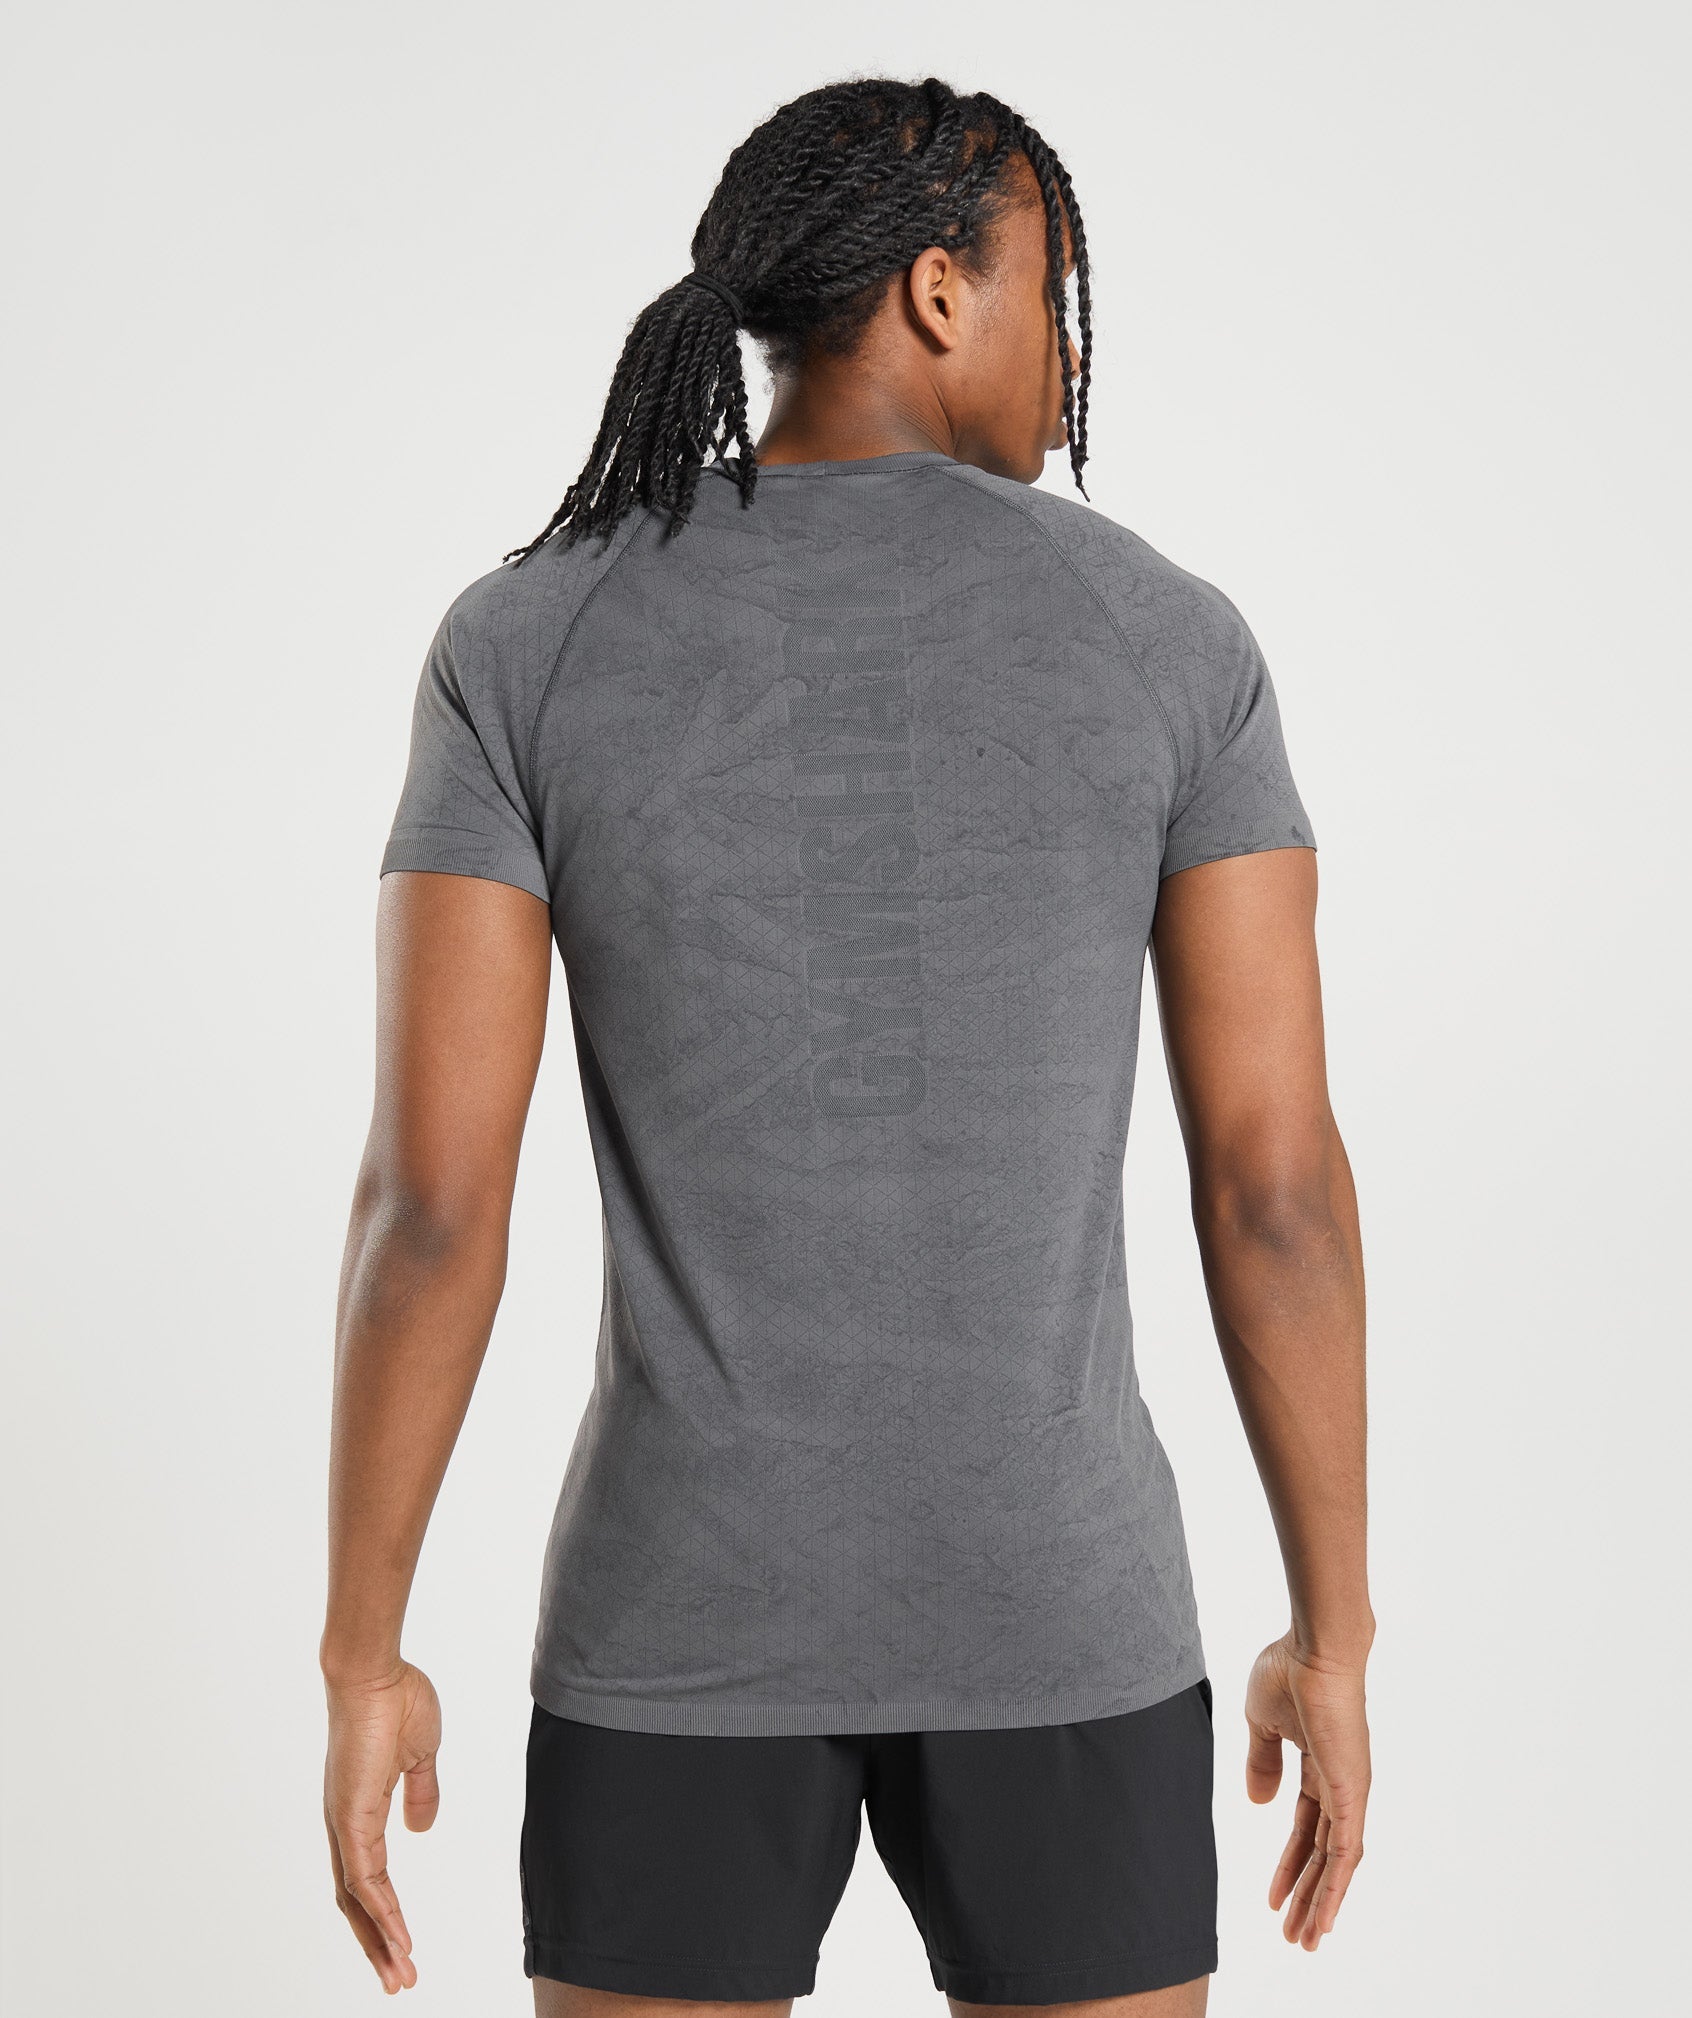 Geo Seamless T-Shirt in Charcoal Grey/Black - view 2